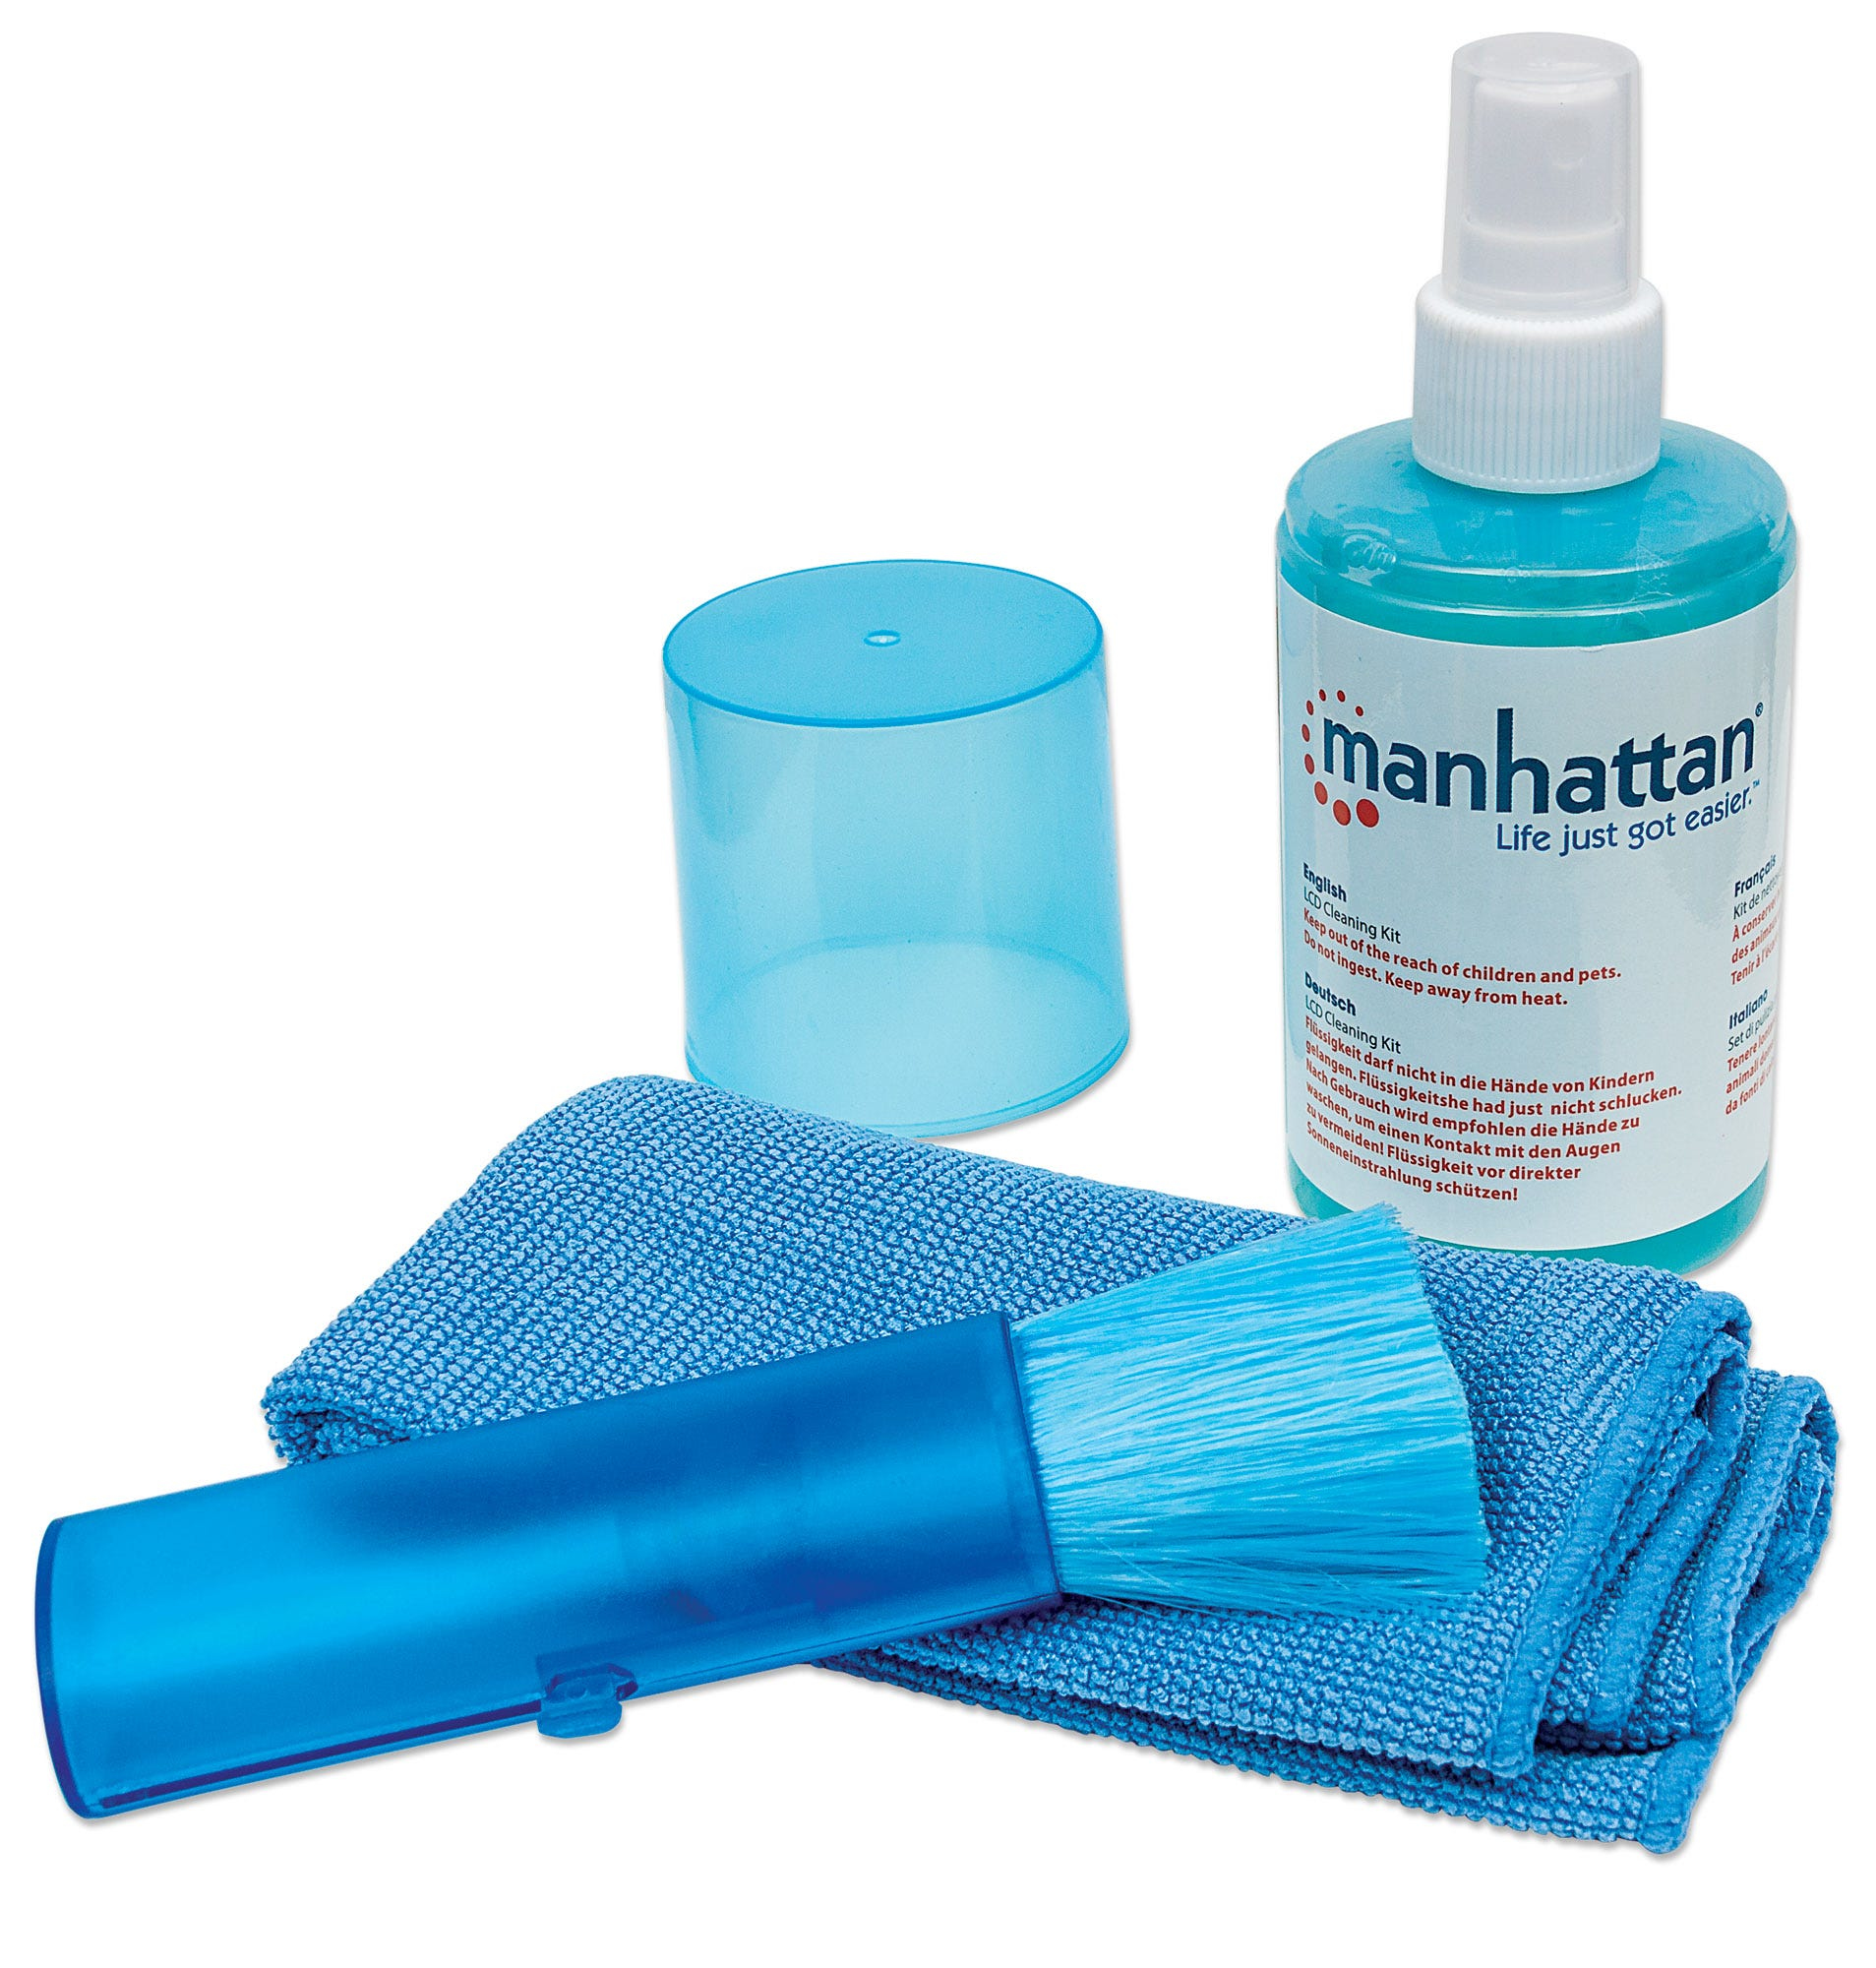 Manhattan LCD Cleaning Kit, Alcohol-free, Includes Cleaning Solution (200ml)